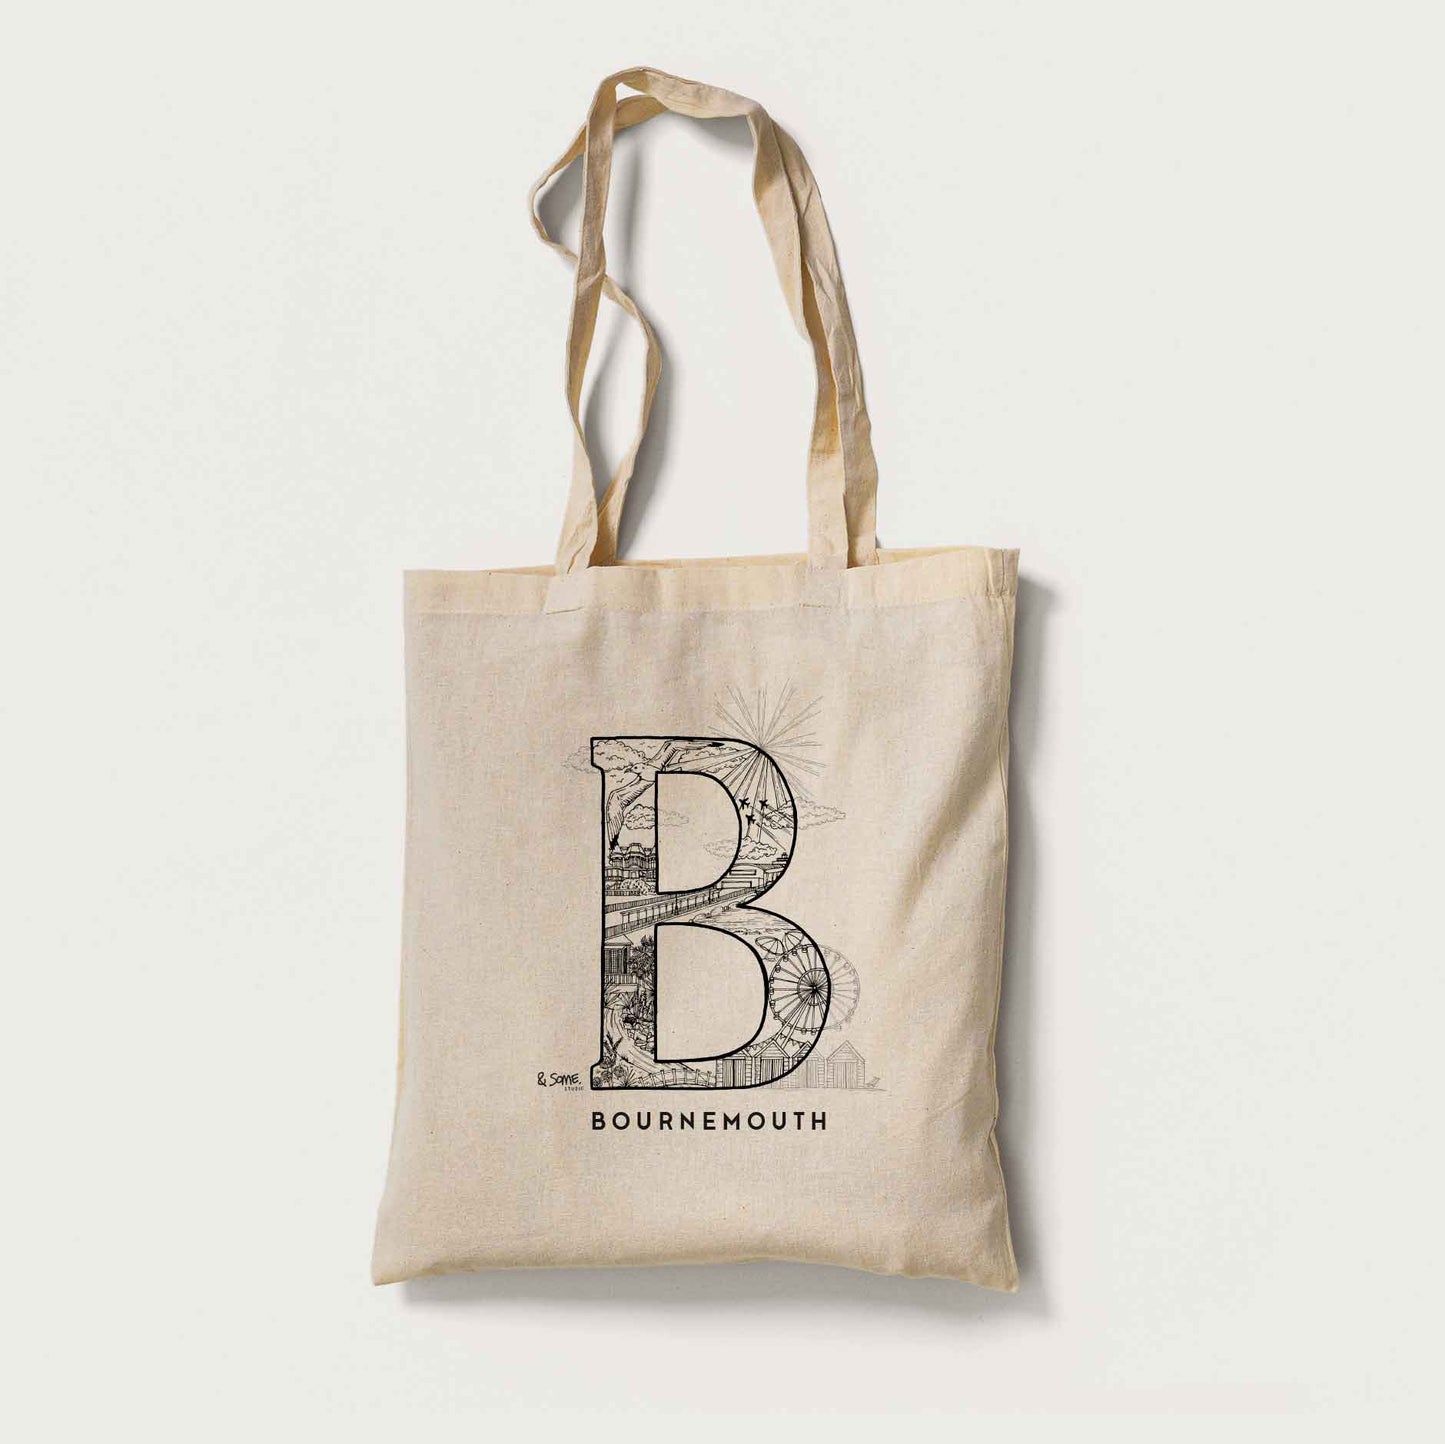 & Some 'B' is for Bournemouth Cotton Tote Bag